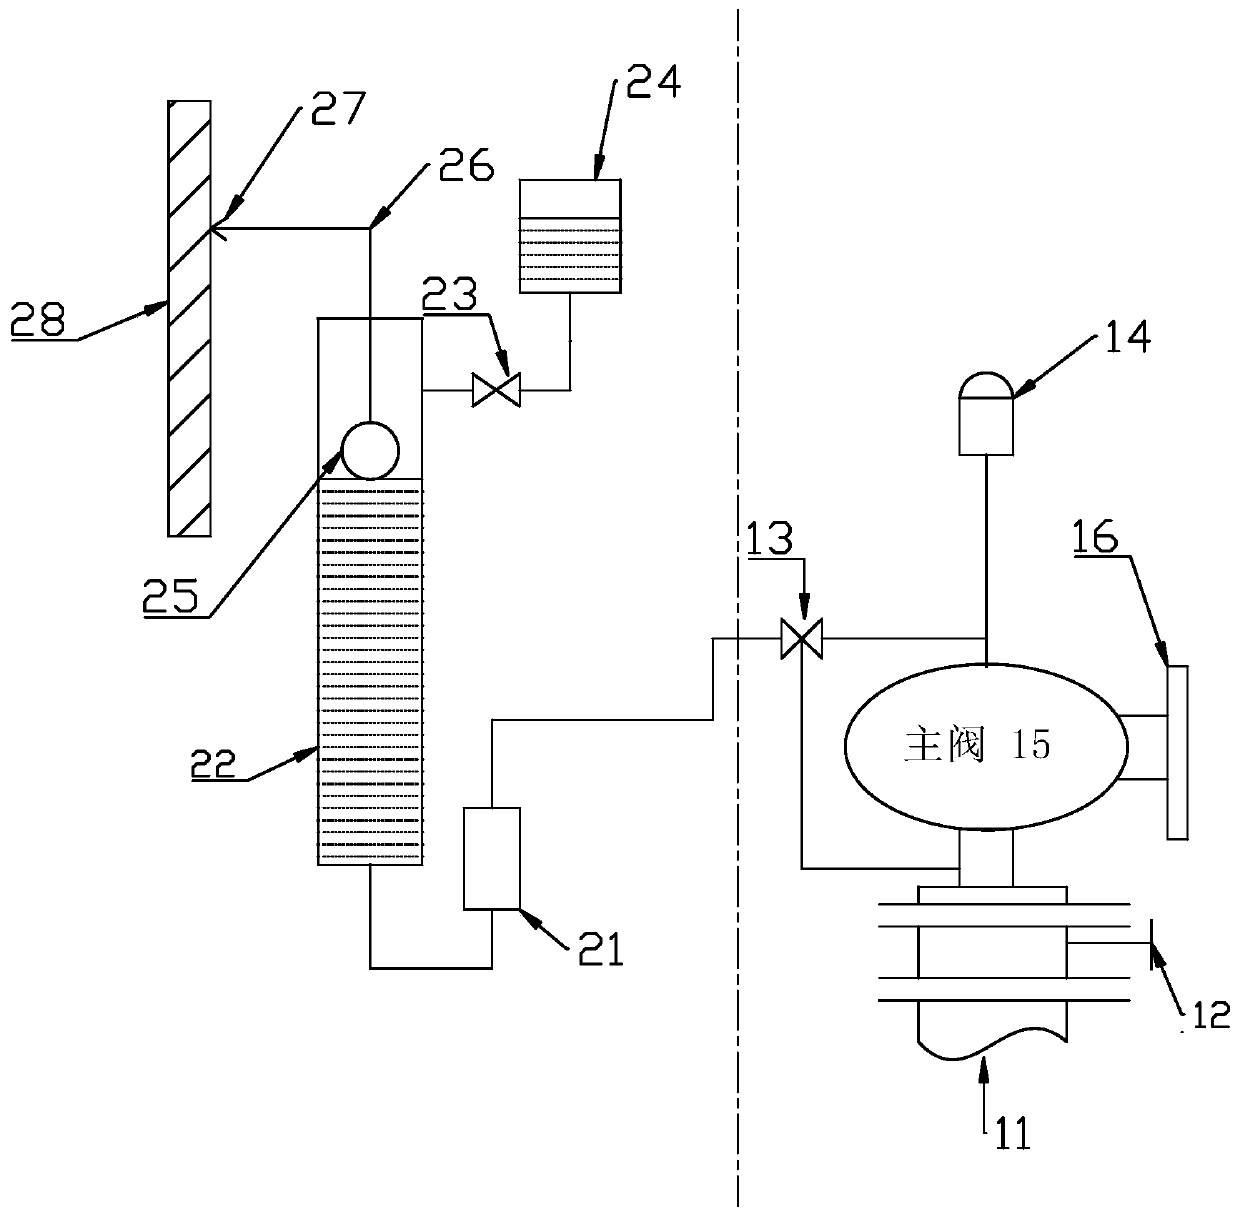 On-line verification system and method of pilot-operated safety valve